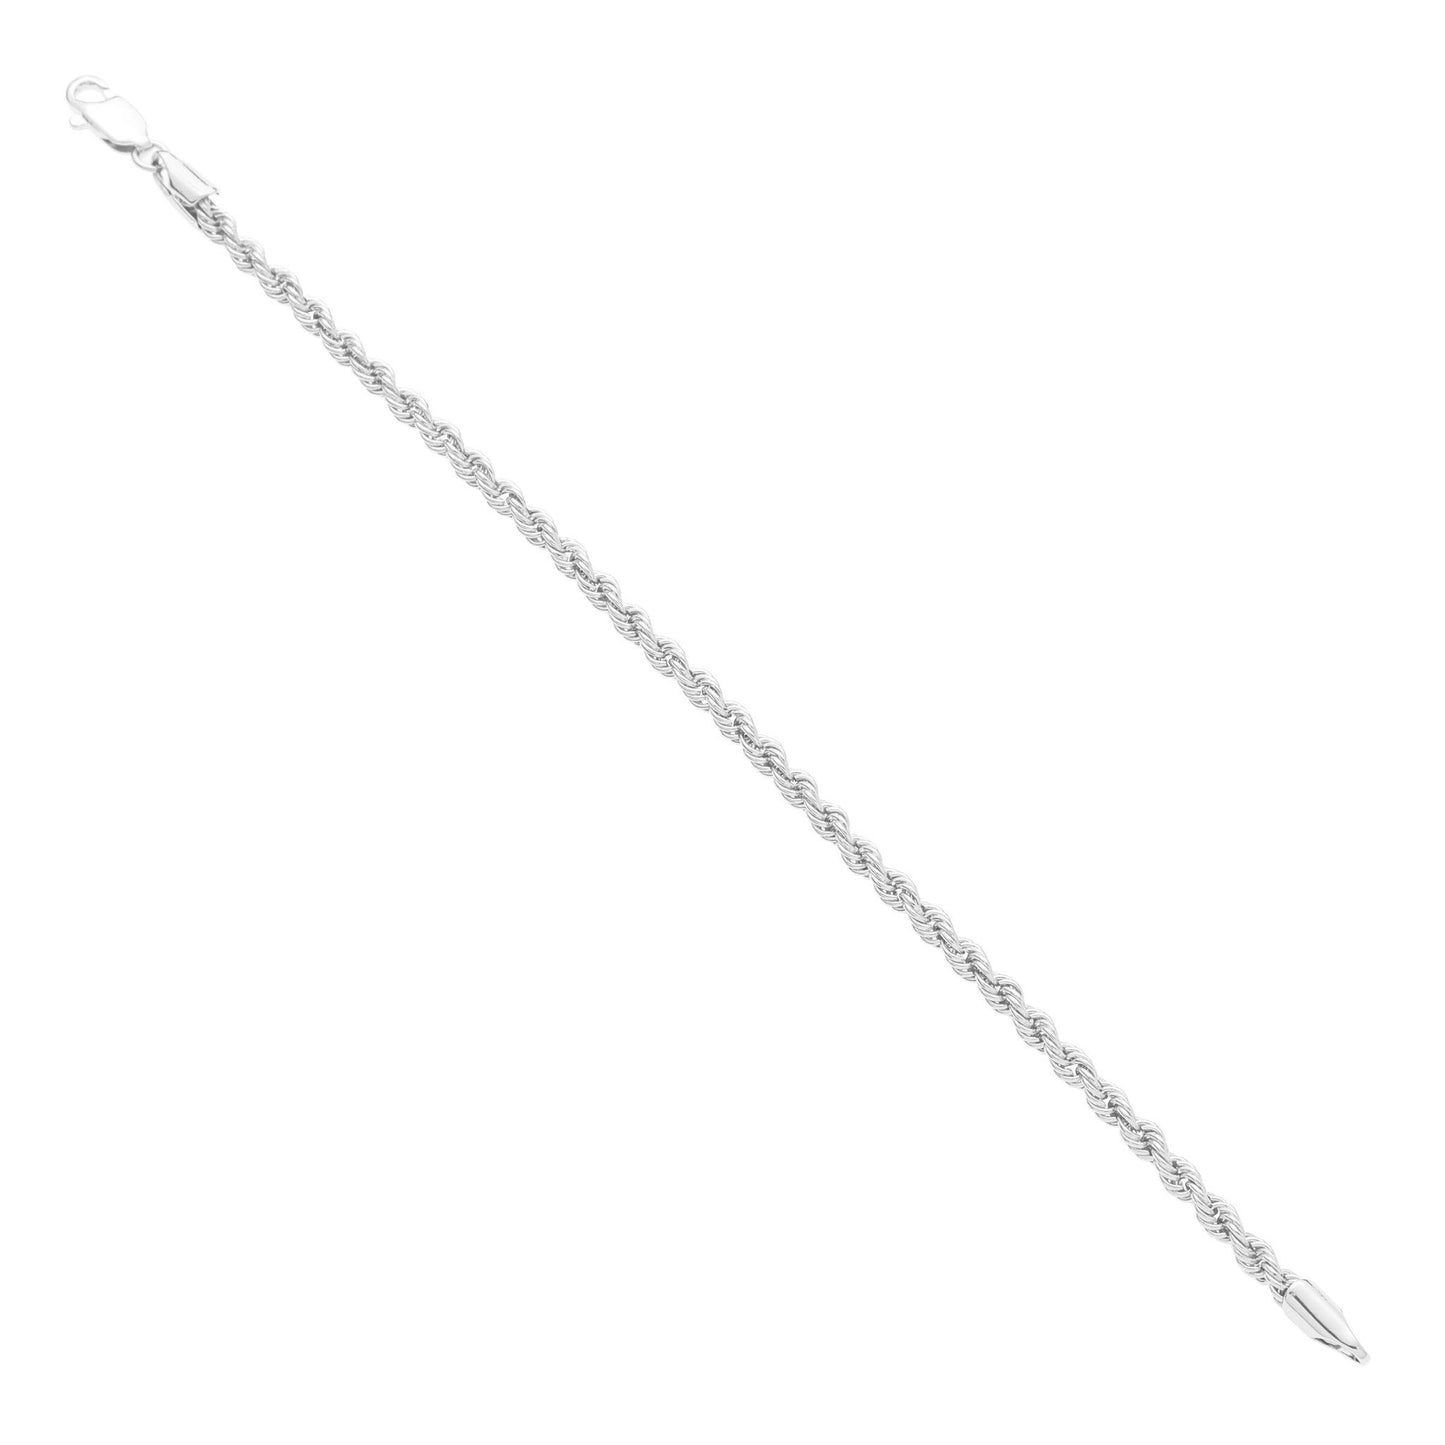 A 3mm diamond-cut french rope bracelet displayed on a neutral white background.